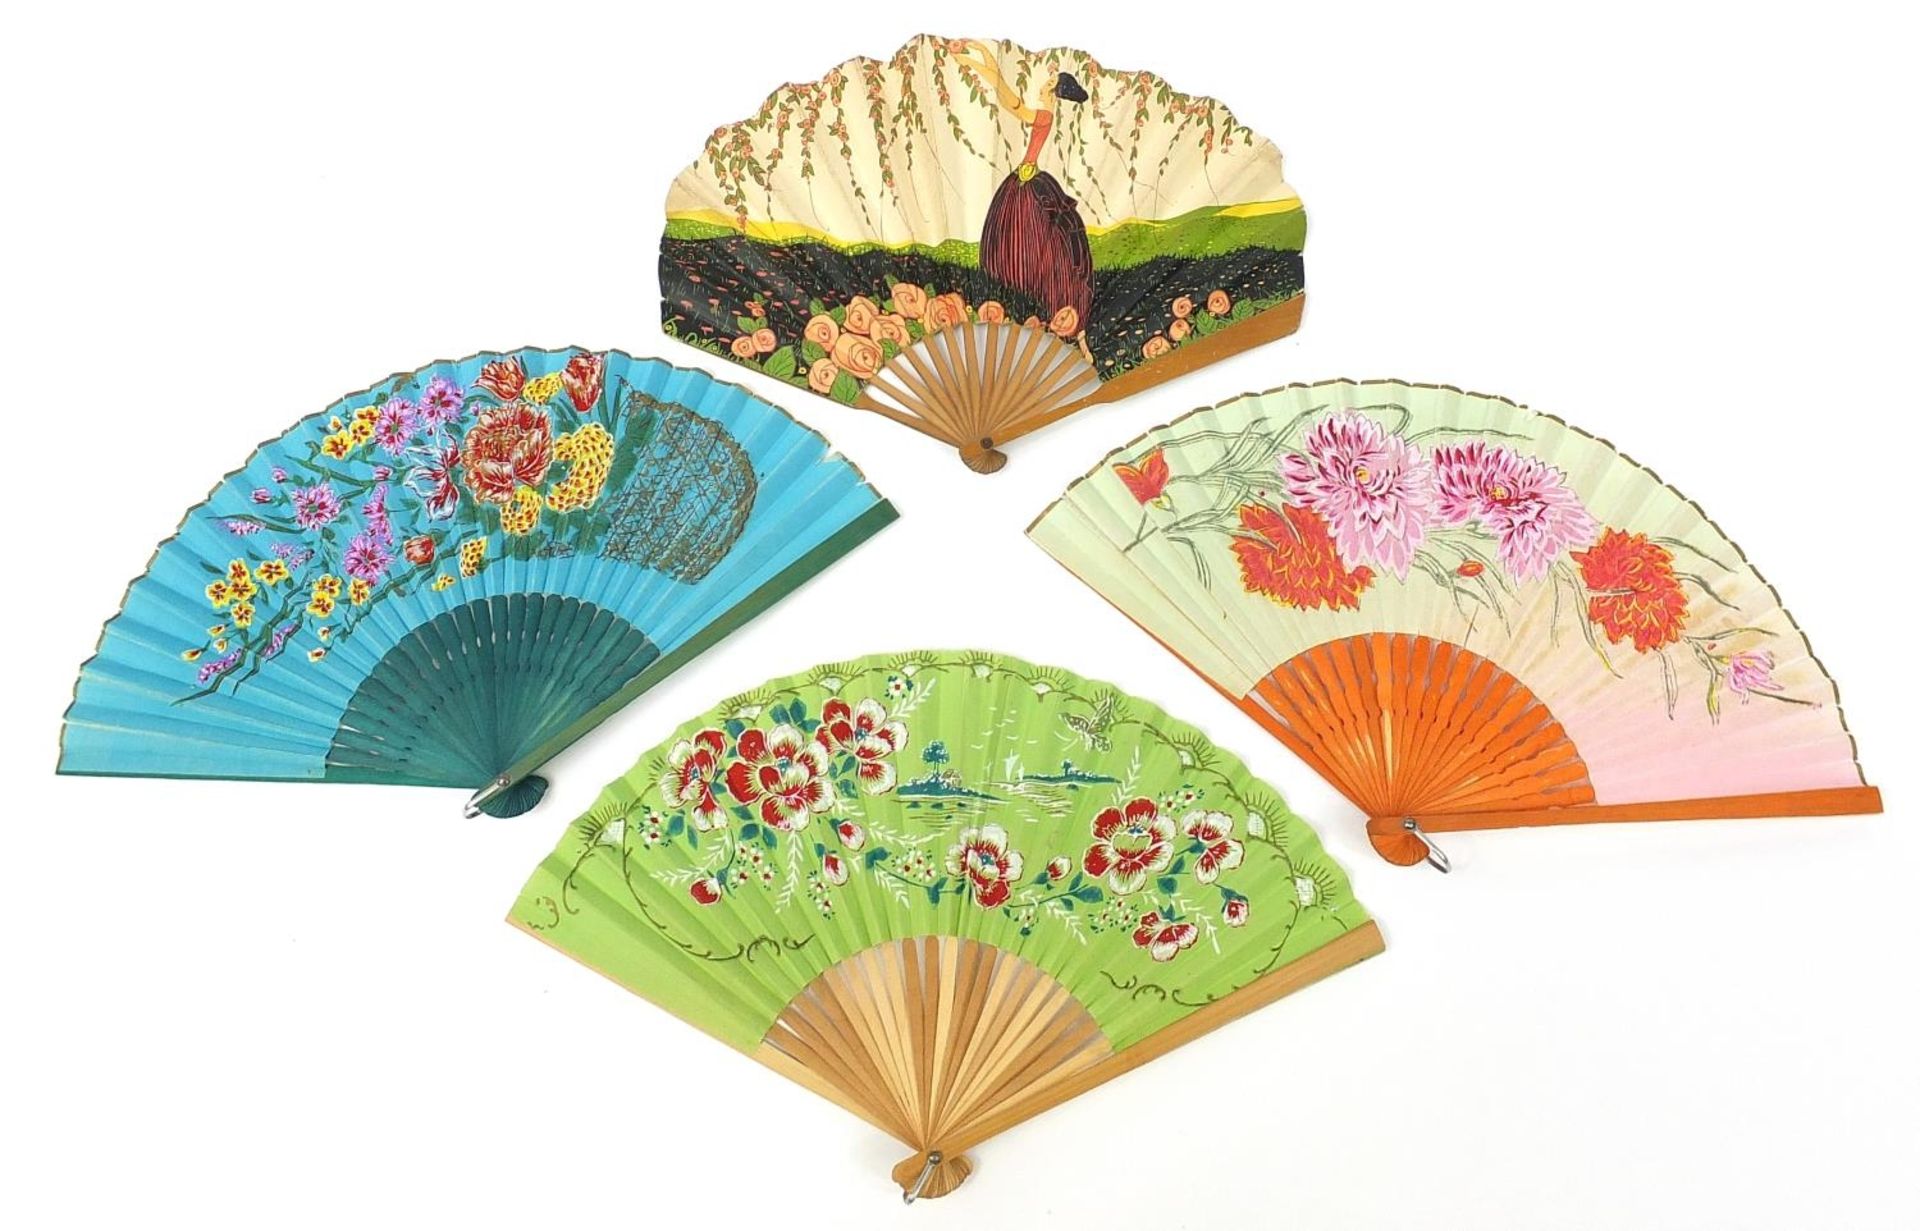 Four Art Deco fans decorated with figures and flowers, the largest 22.5cm in length when closed